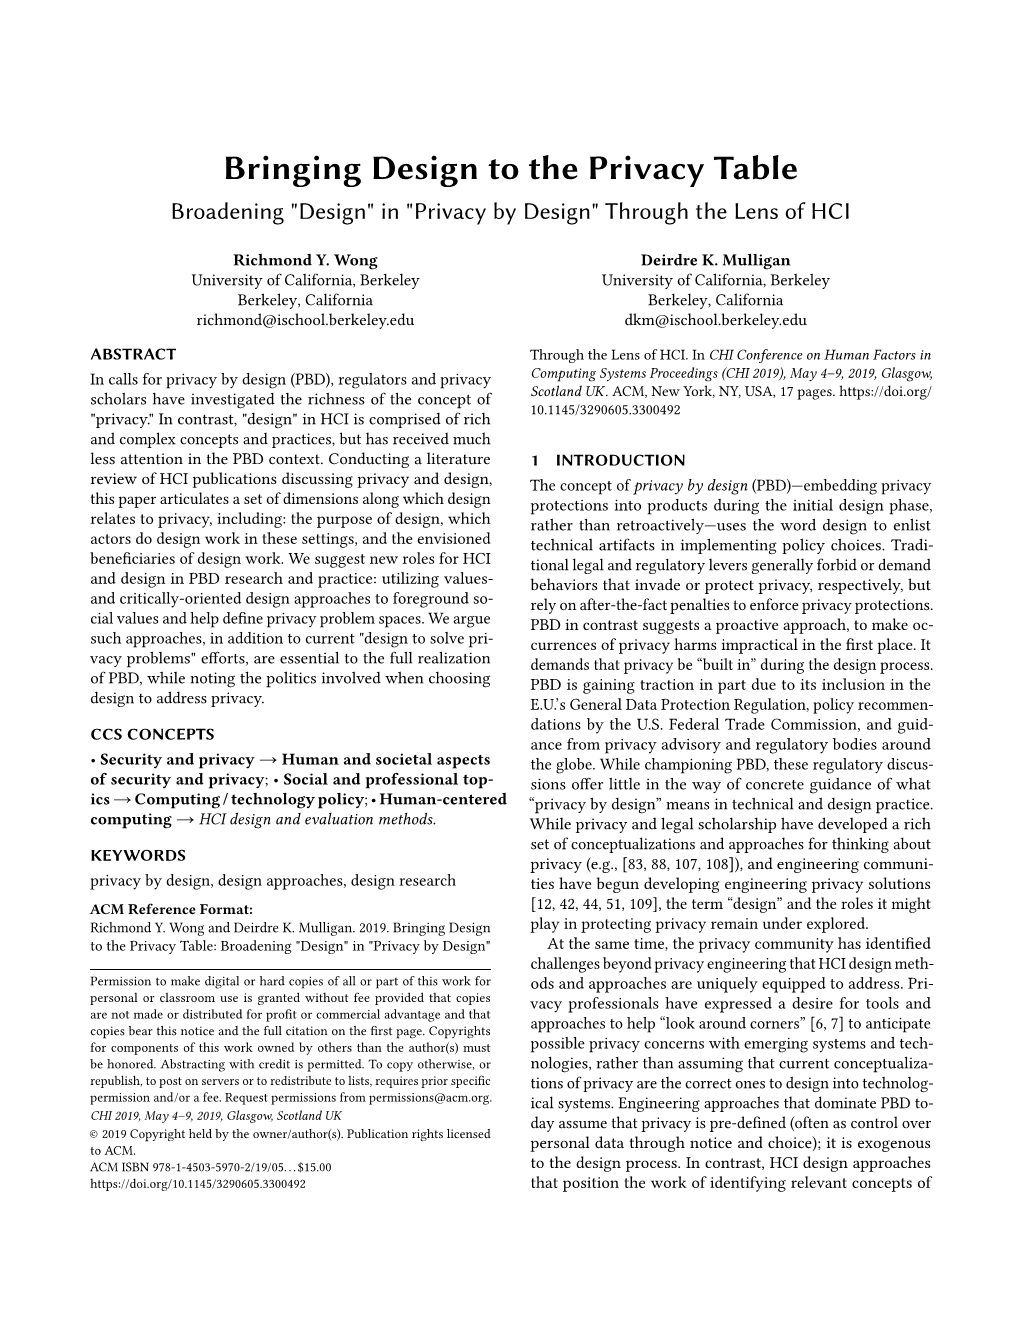 Bringing Design to the Privacy Table: Broadening